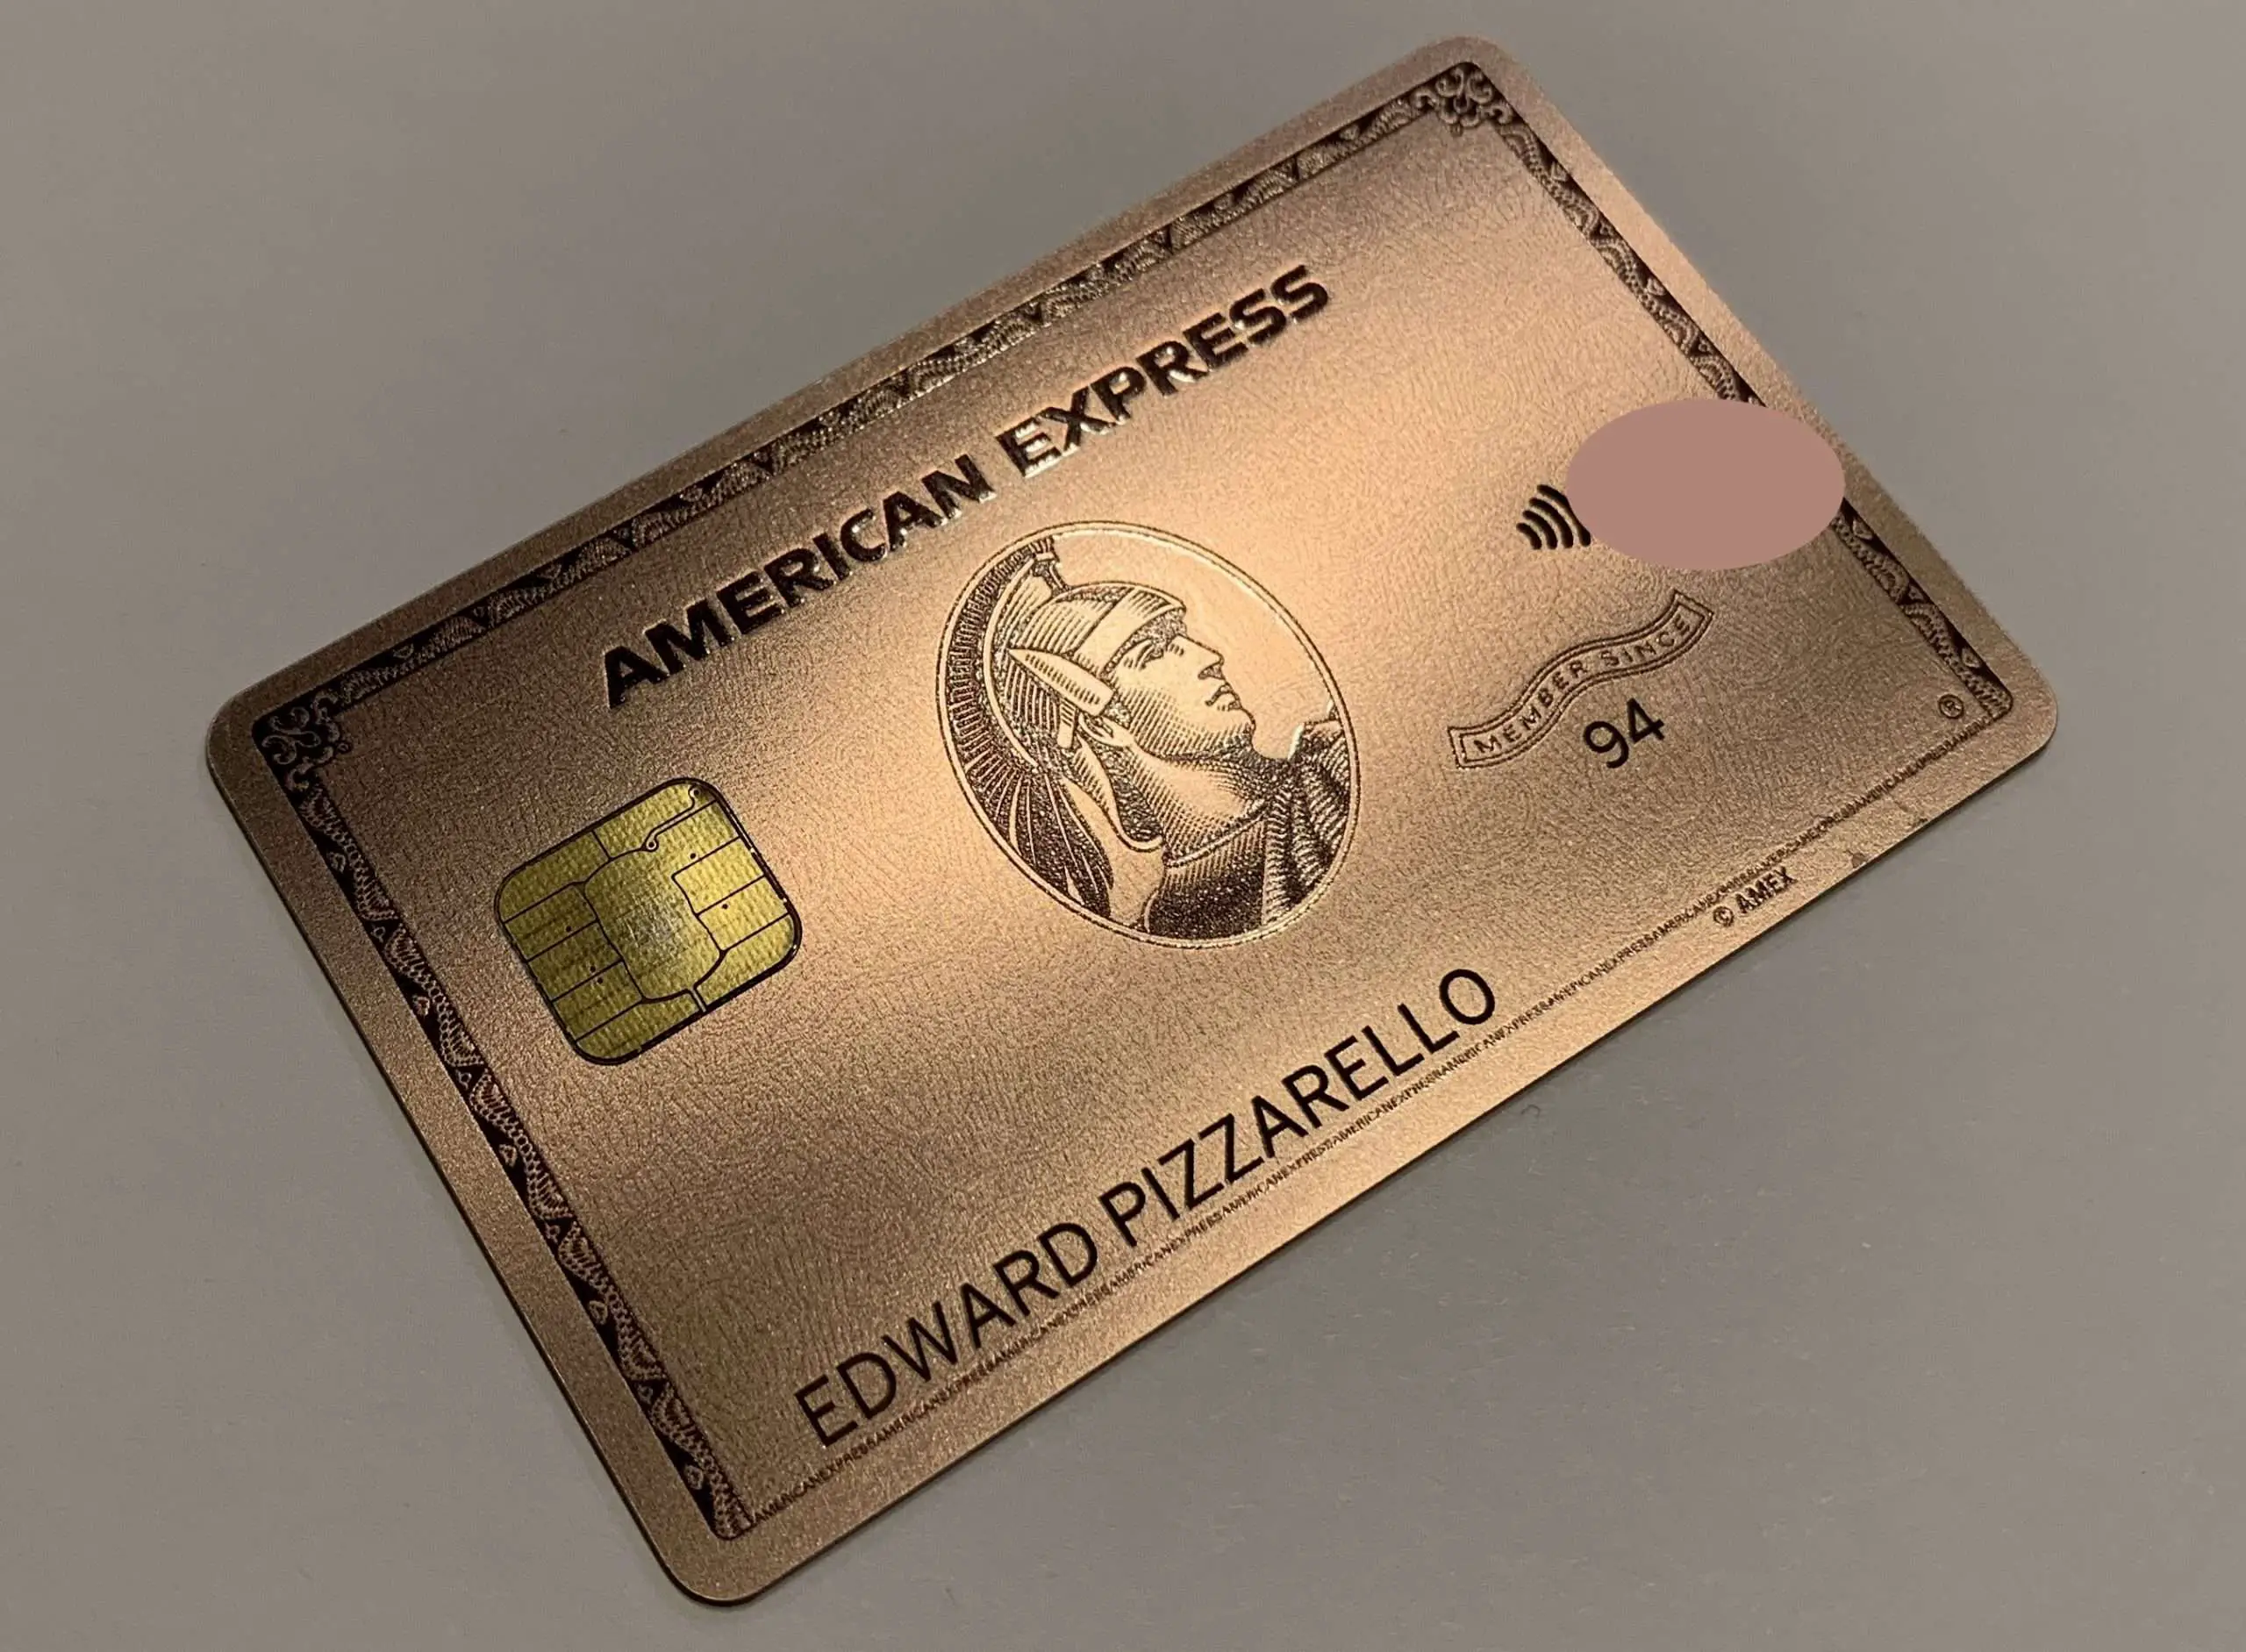 Why I Got The American Express (Rose) Gold Card. And, Why I Think It